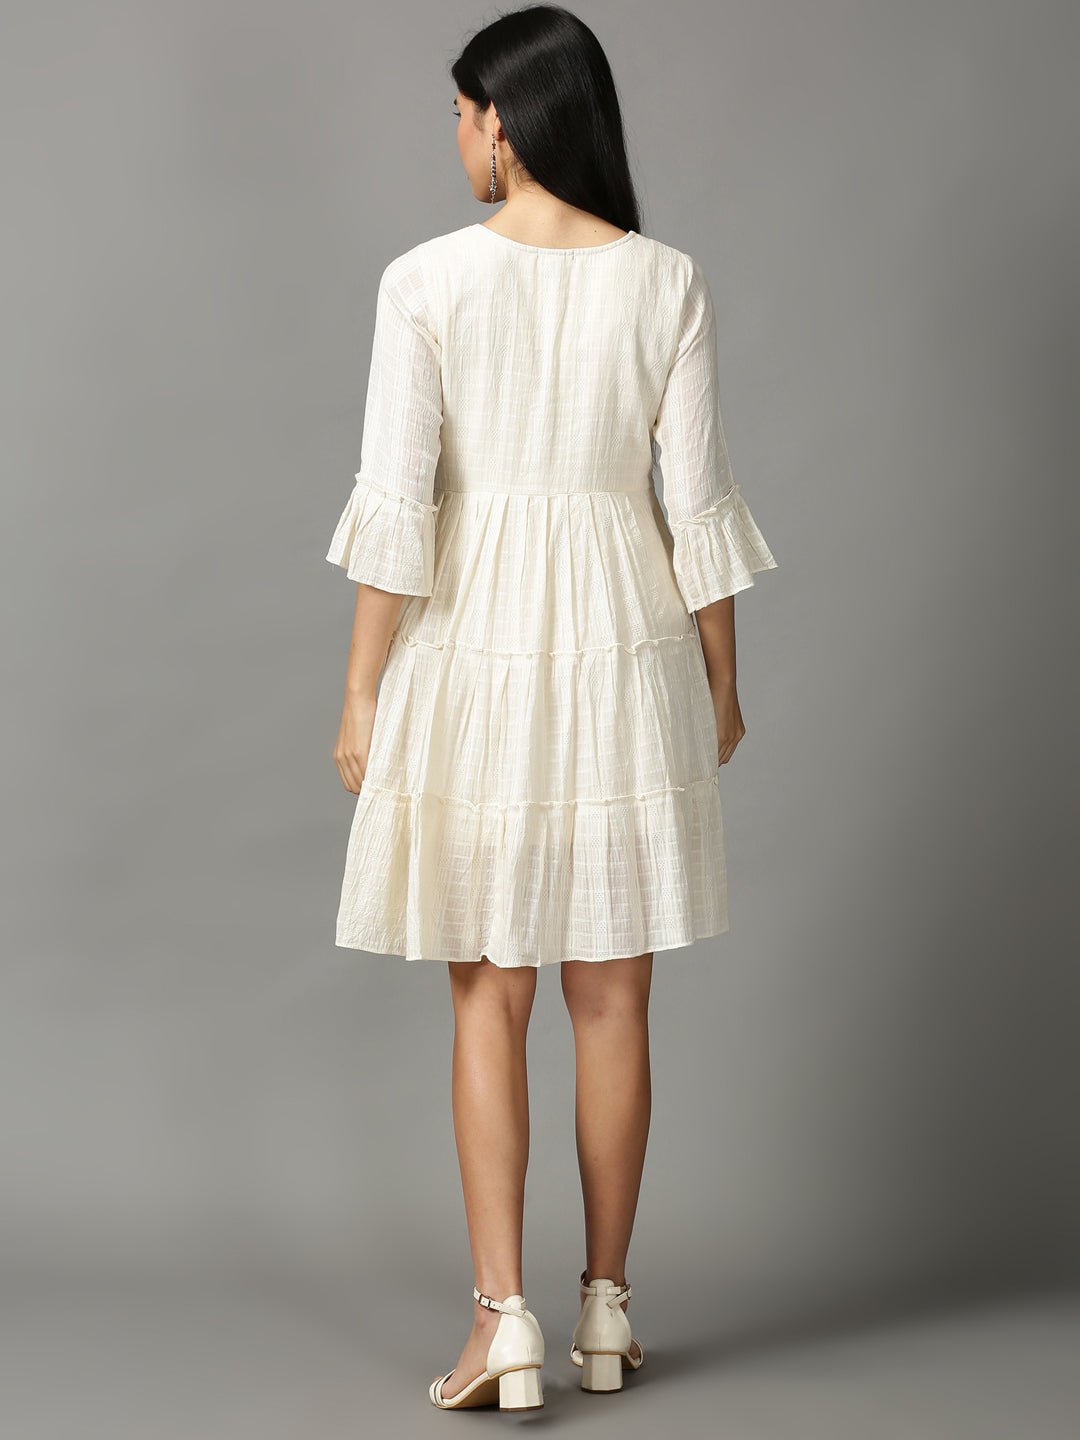 Women's Off White Solid Fit and Flare Dress